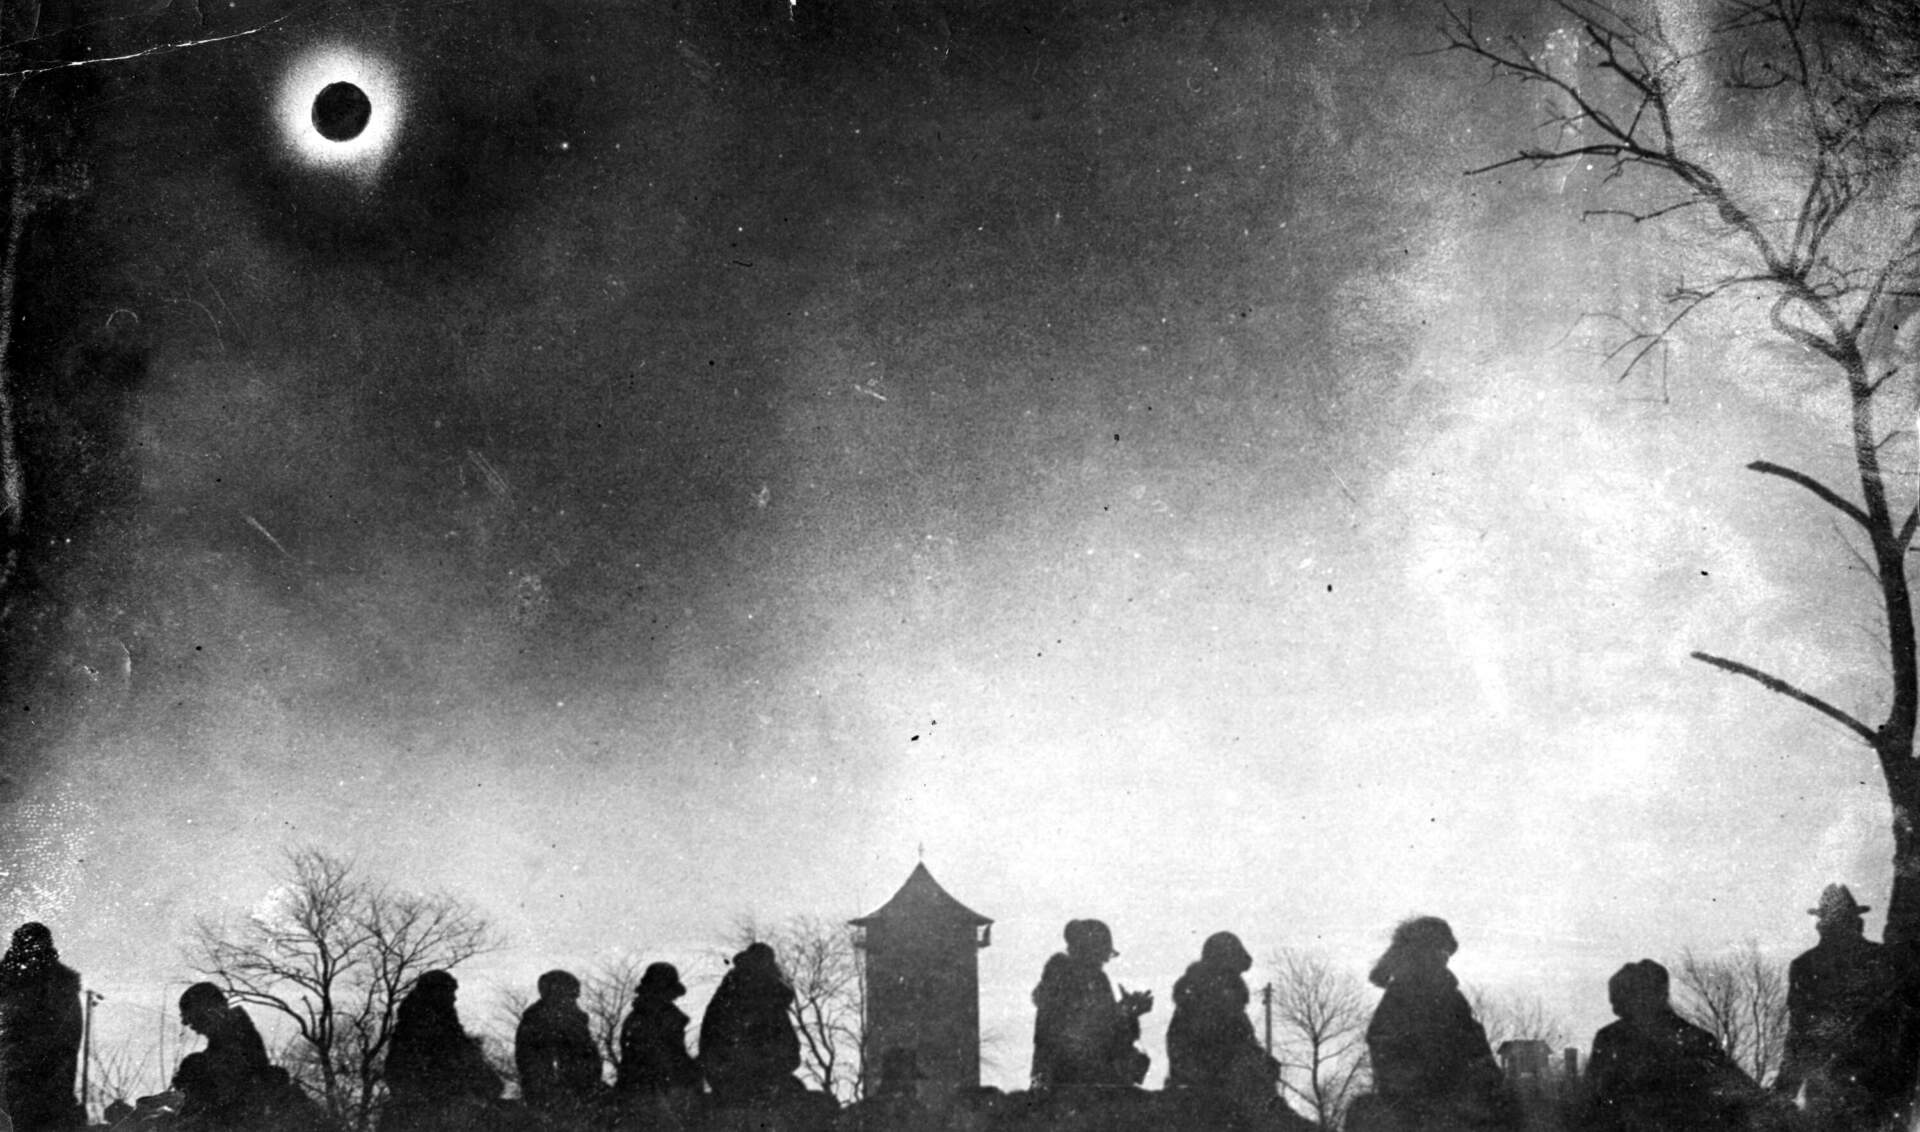 A group of people gathered in zero degree weather to watch the solar eclipse, showing the corona, at Vose Field in Westerly, Rhode Island, at around 9:30 a.m., on Jan. 24, 1925. An estimated 10,000 visitors came to watch the event. (James L. Callahan/The Boston Globe via Getty Images)